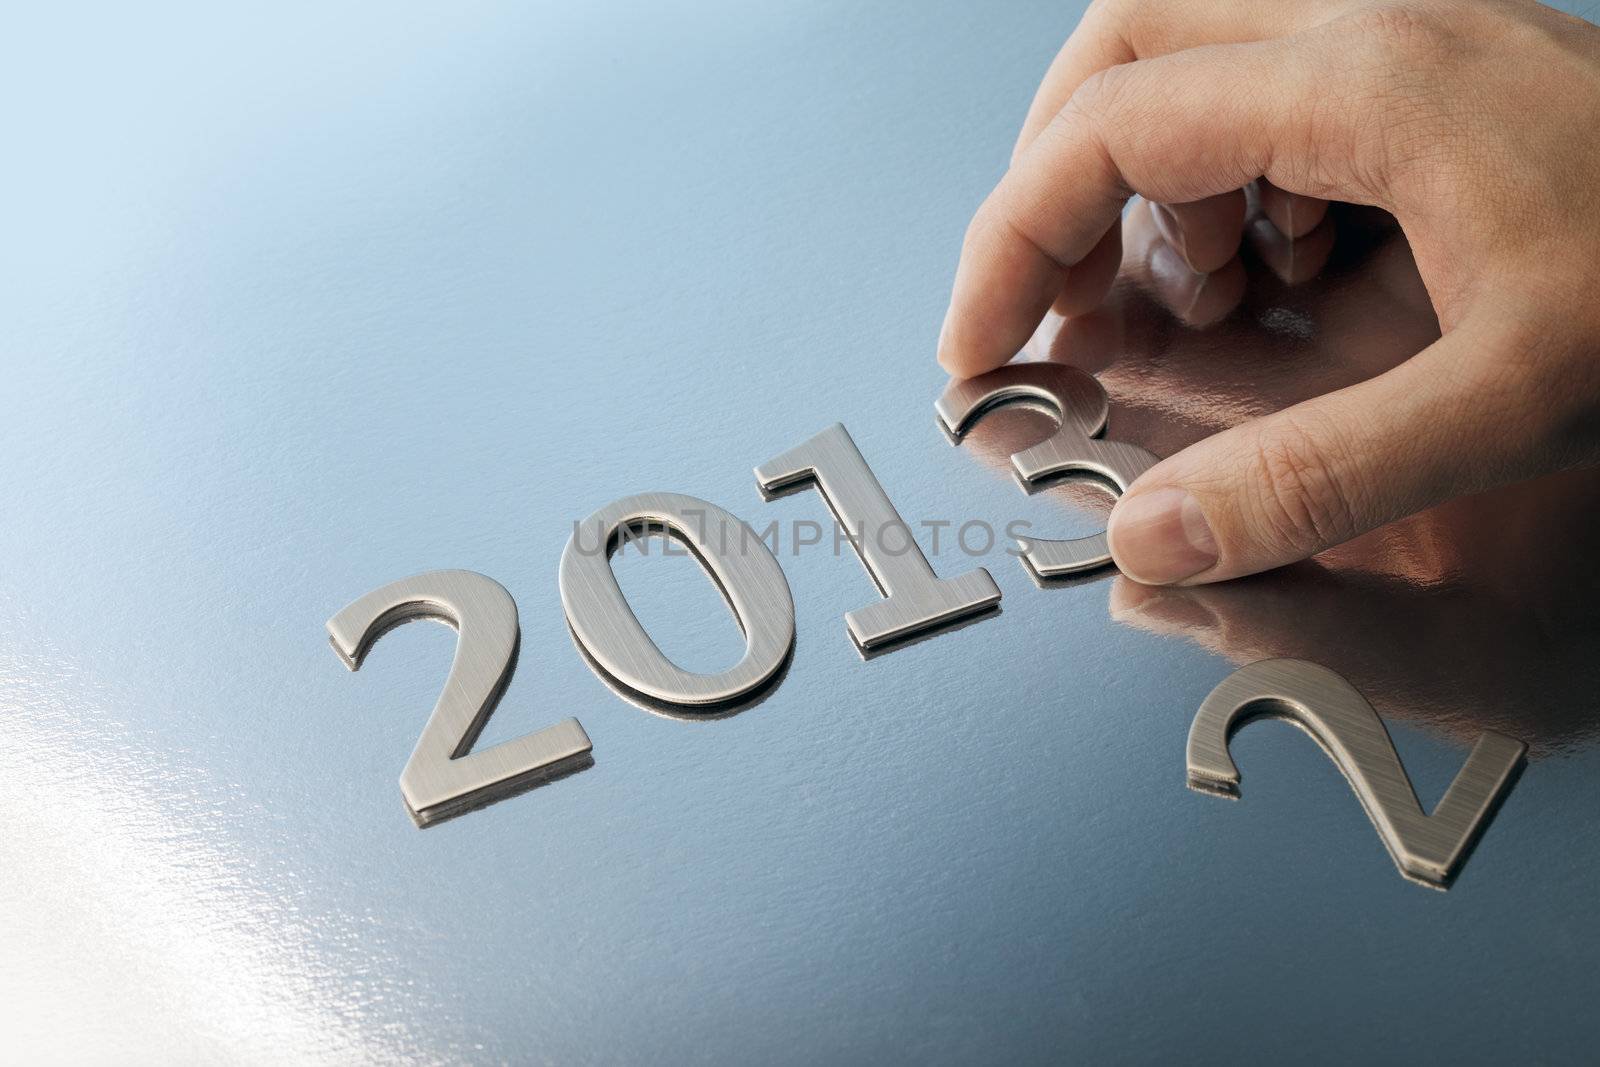 Hand adjusting the year number to 2013.